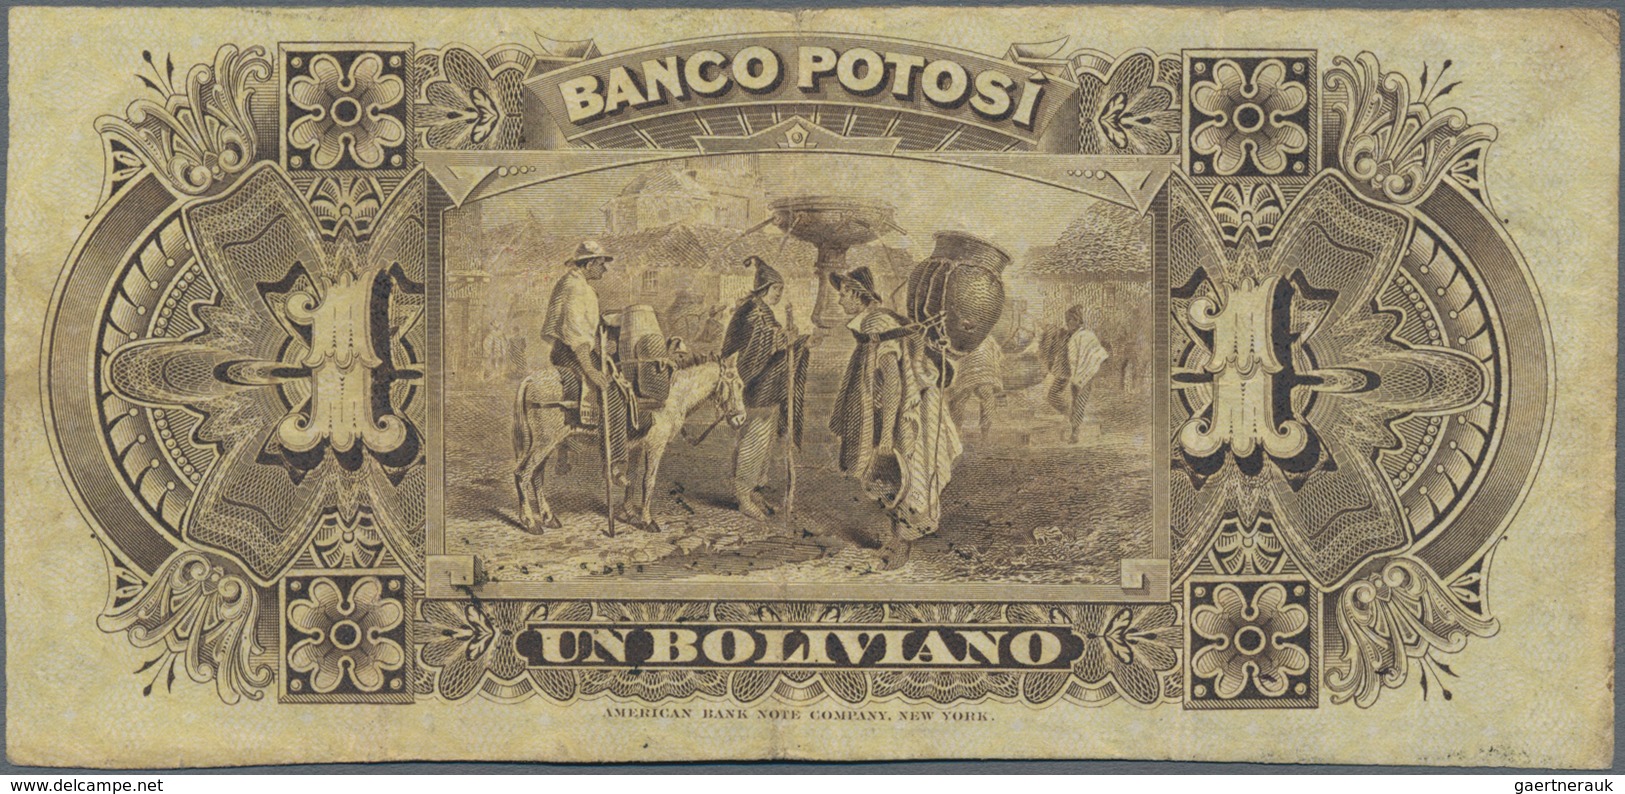 Bolivia / Bolivien: Very nice group with 8 banknotes comprising 50 Centavos 1902 P.91 (UNC), 1 Boliv